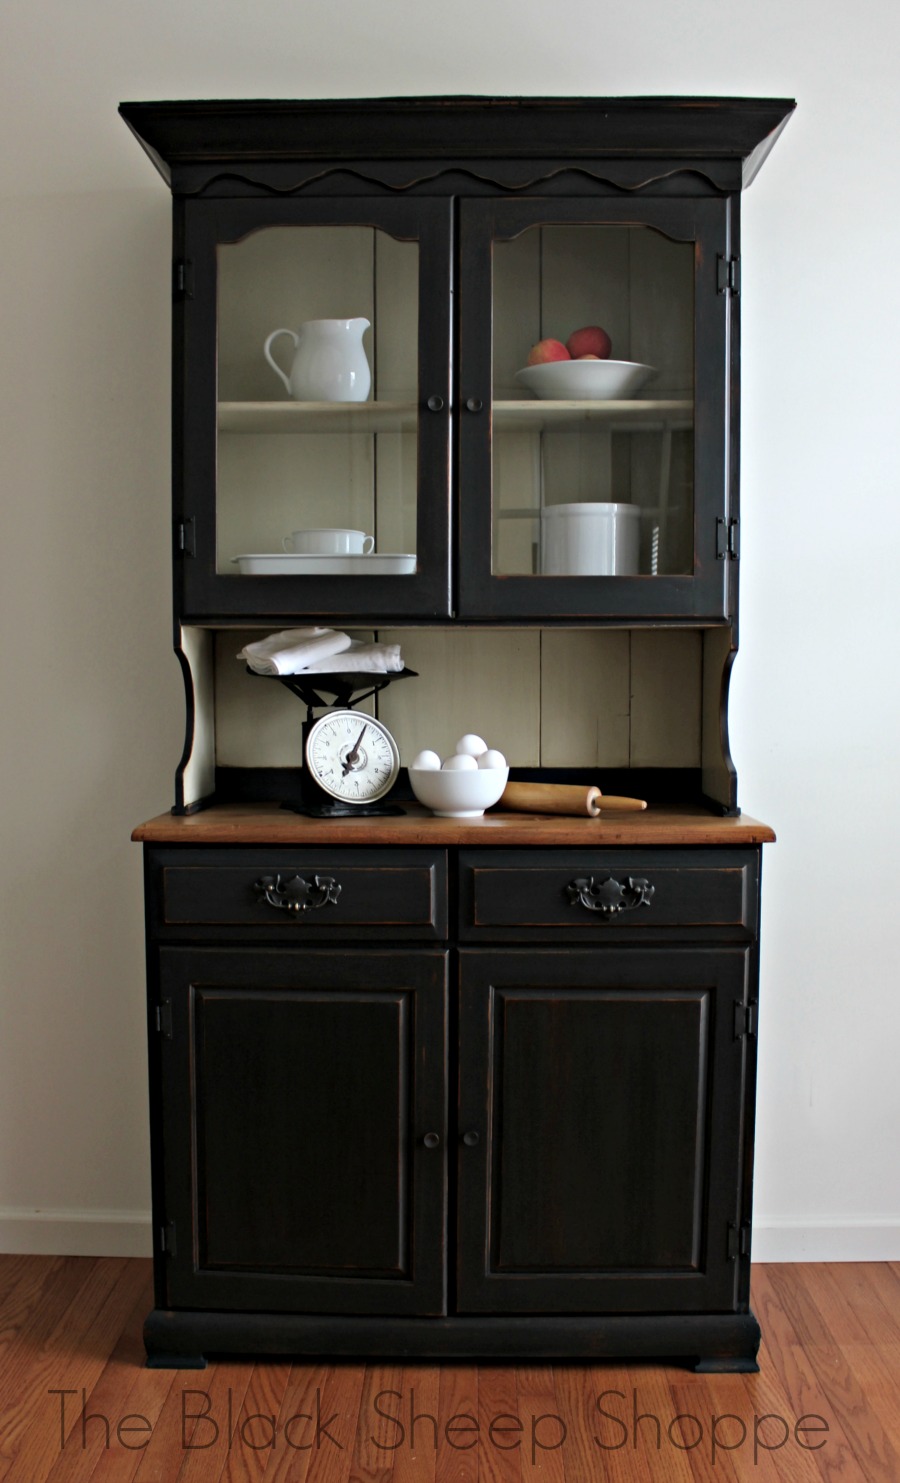 Farmhouse China Hutch, Images Of Black Painted China Cabinets